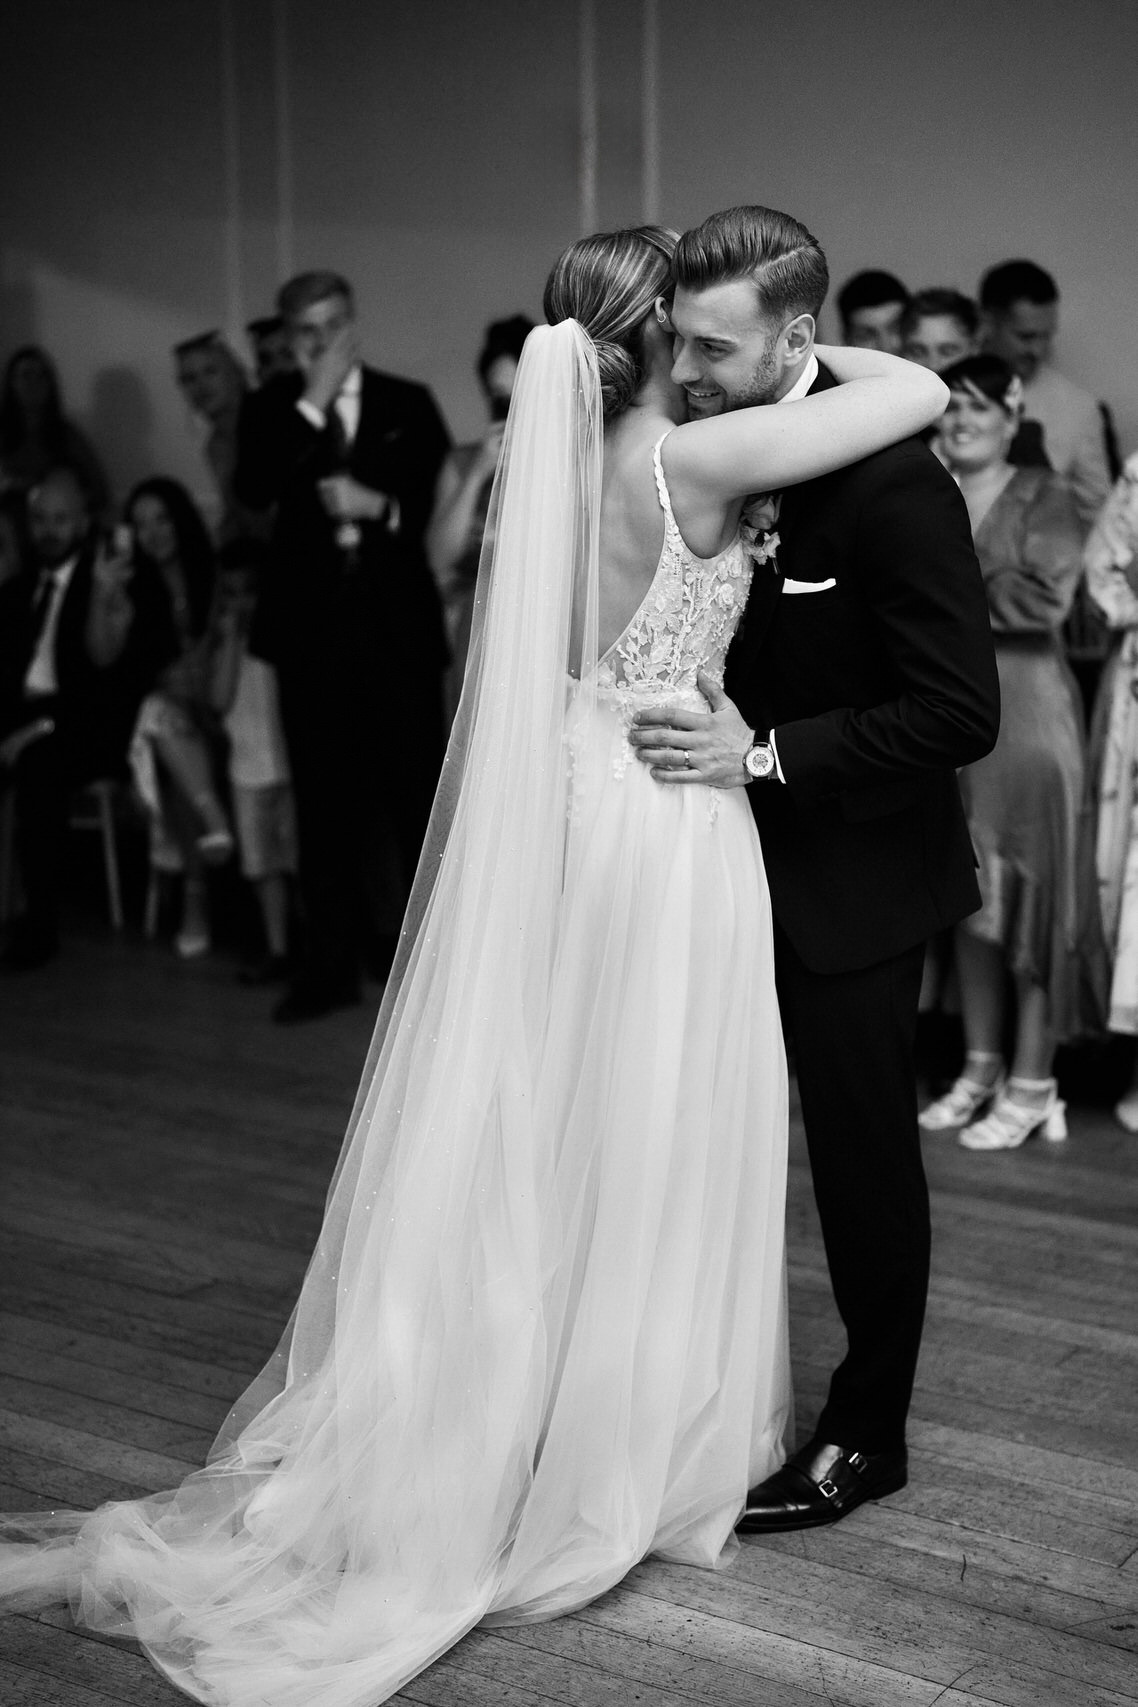 A bride and groom embrace during their first dance.